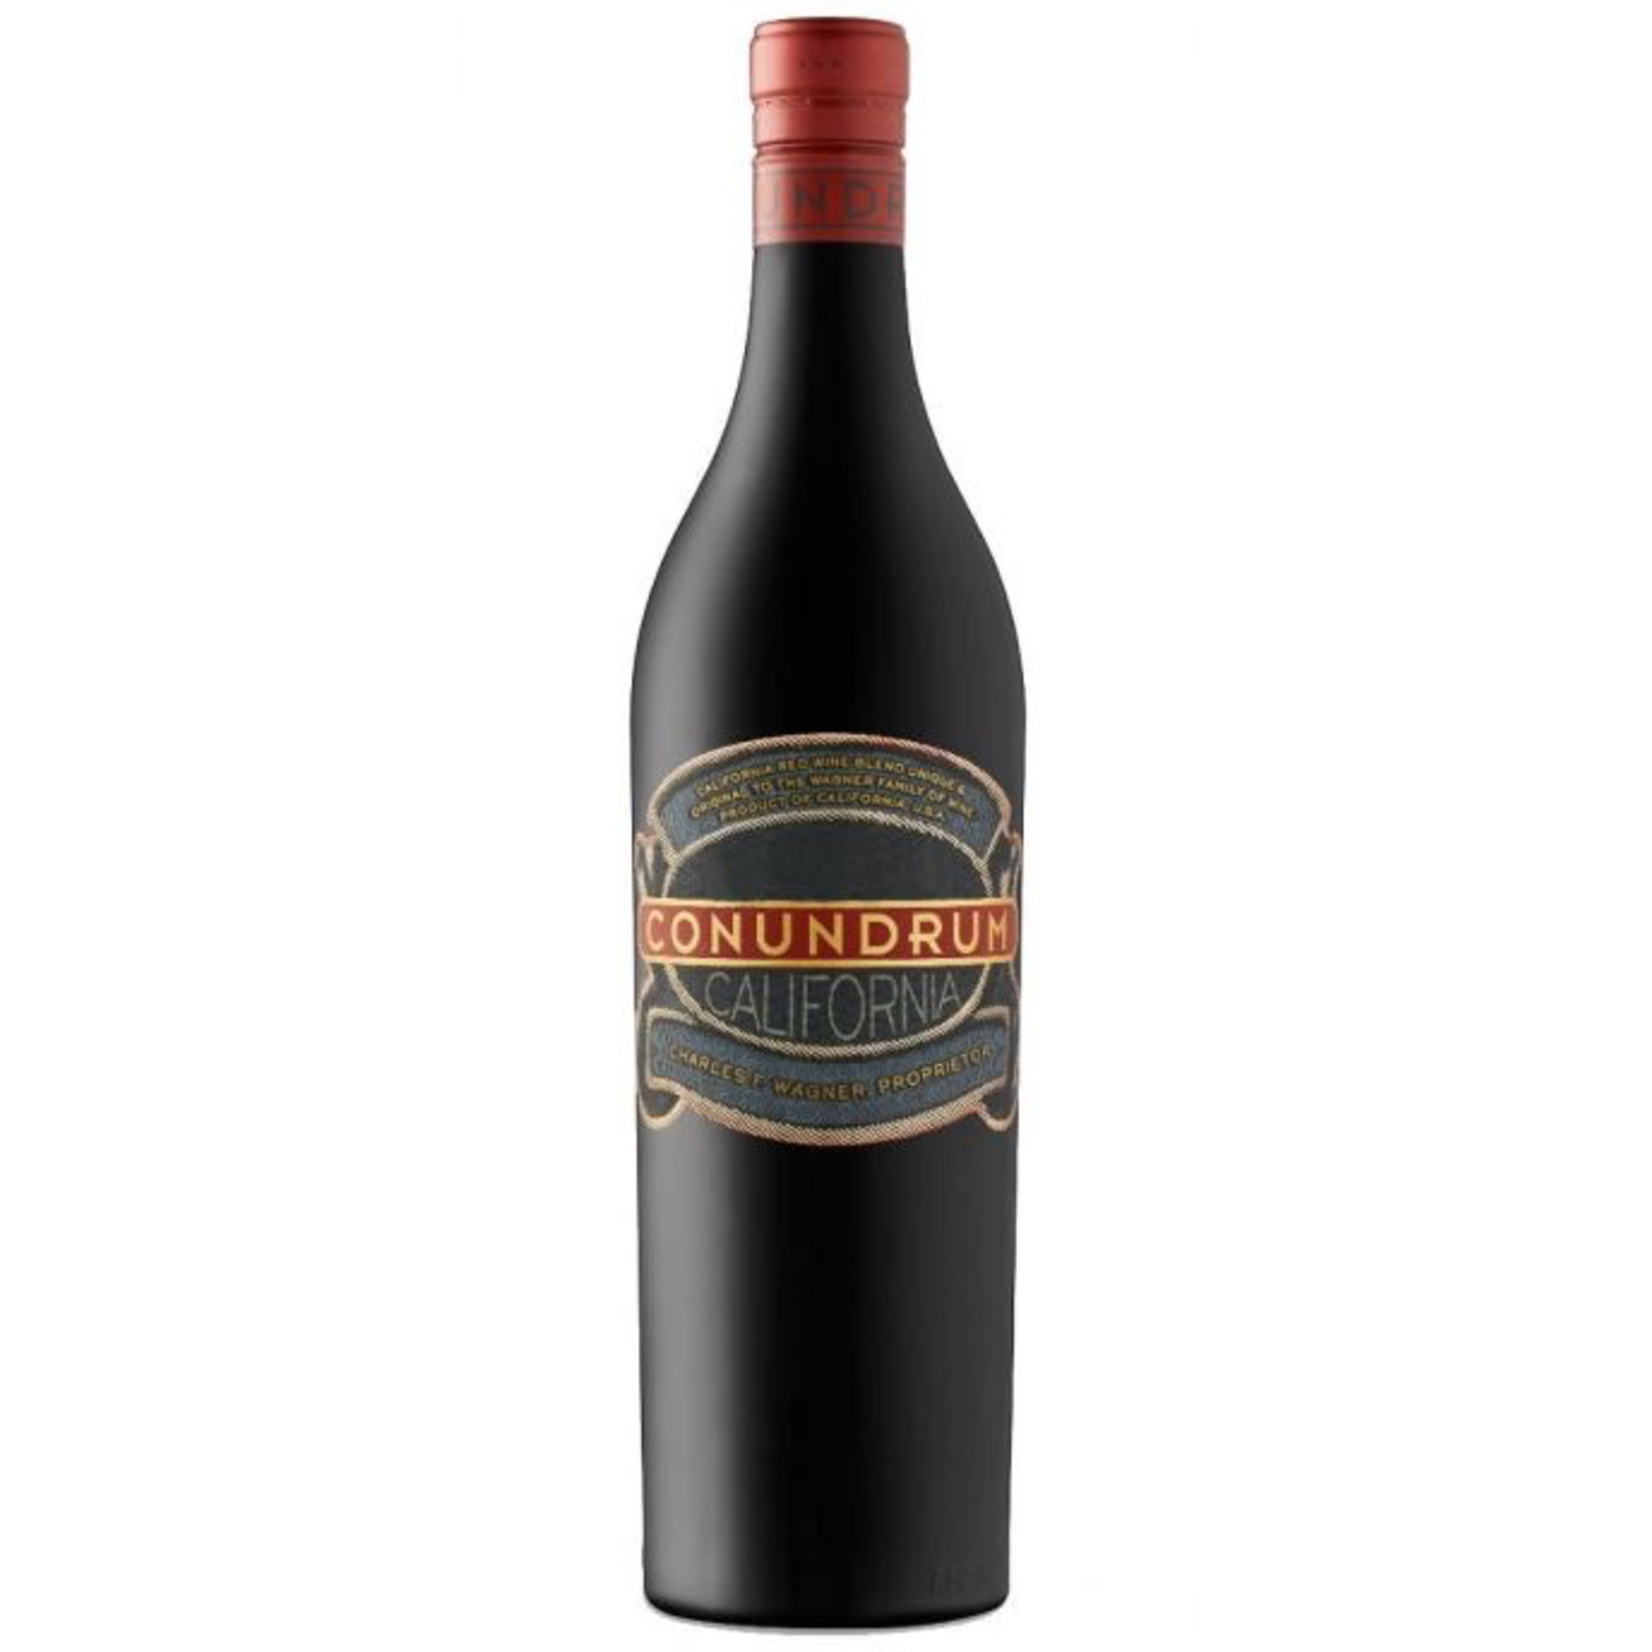 NV, Conundrum by Caymus, Red Blend, Rutherford, Napa Valley, California, 14.2% Alc, CT89, T2,Sw4,Sm3,C2,I3